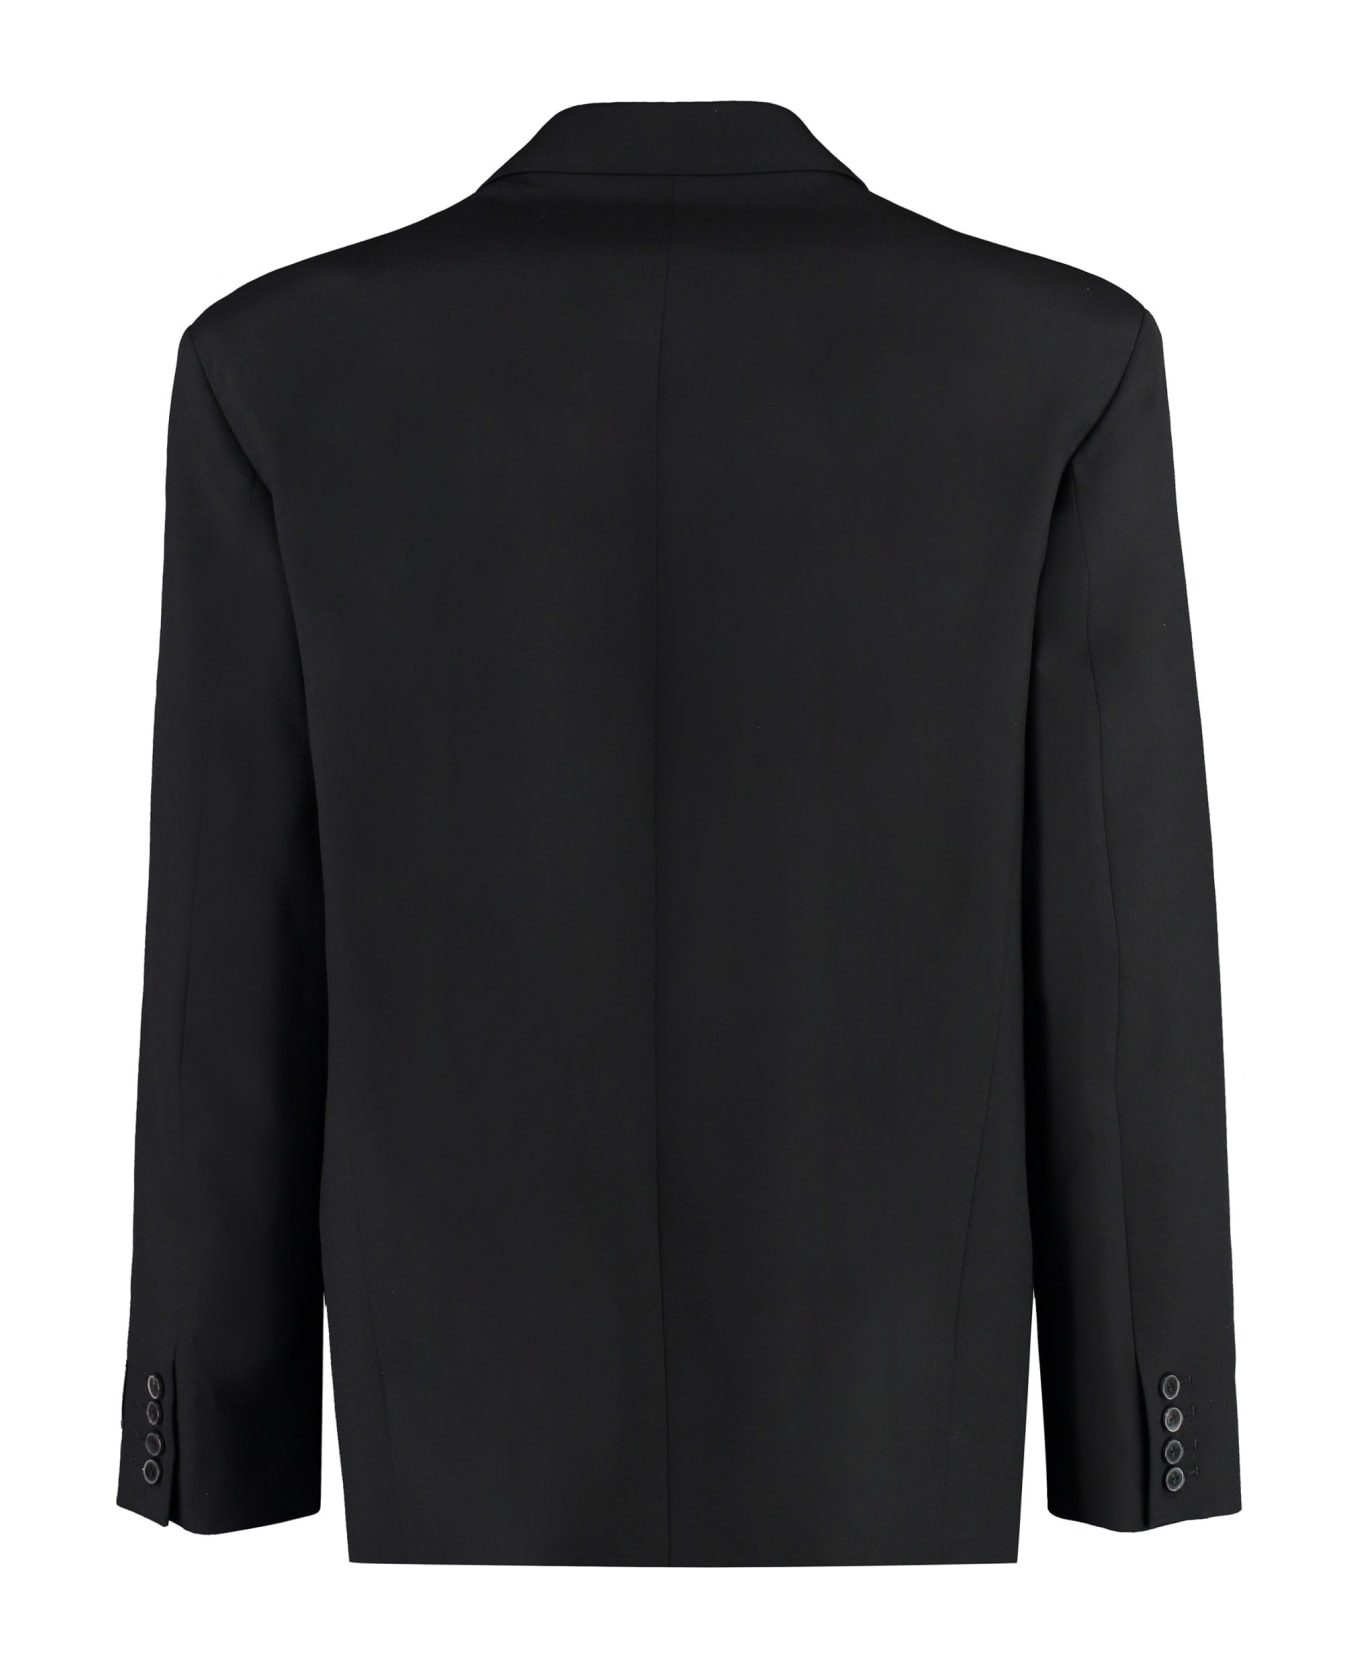 Valentino Double-breasted Wool Blazer - black